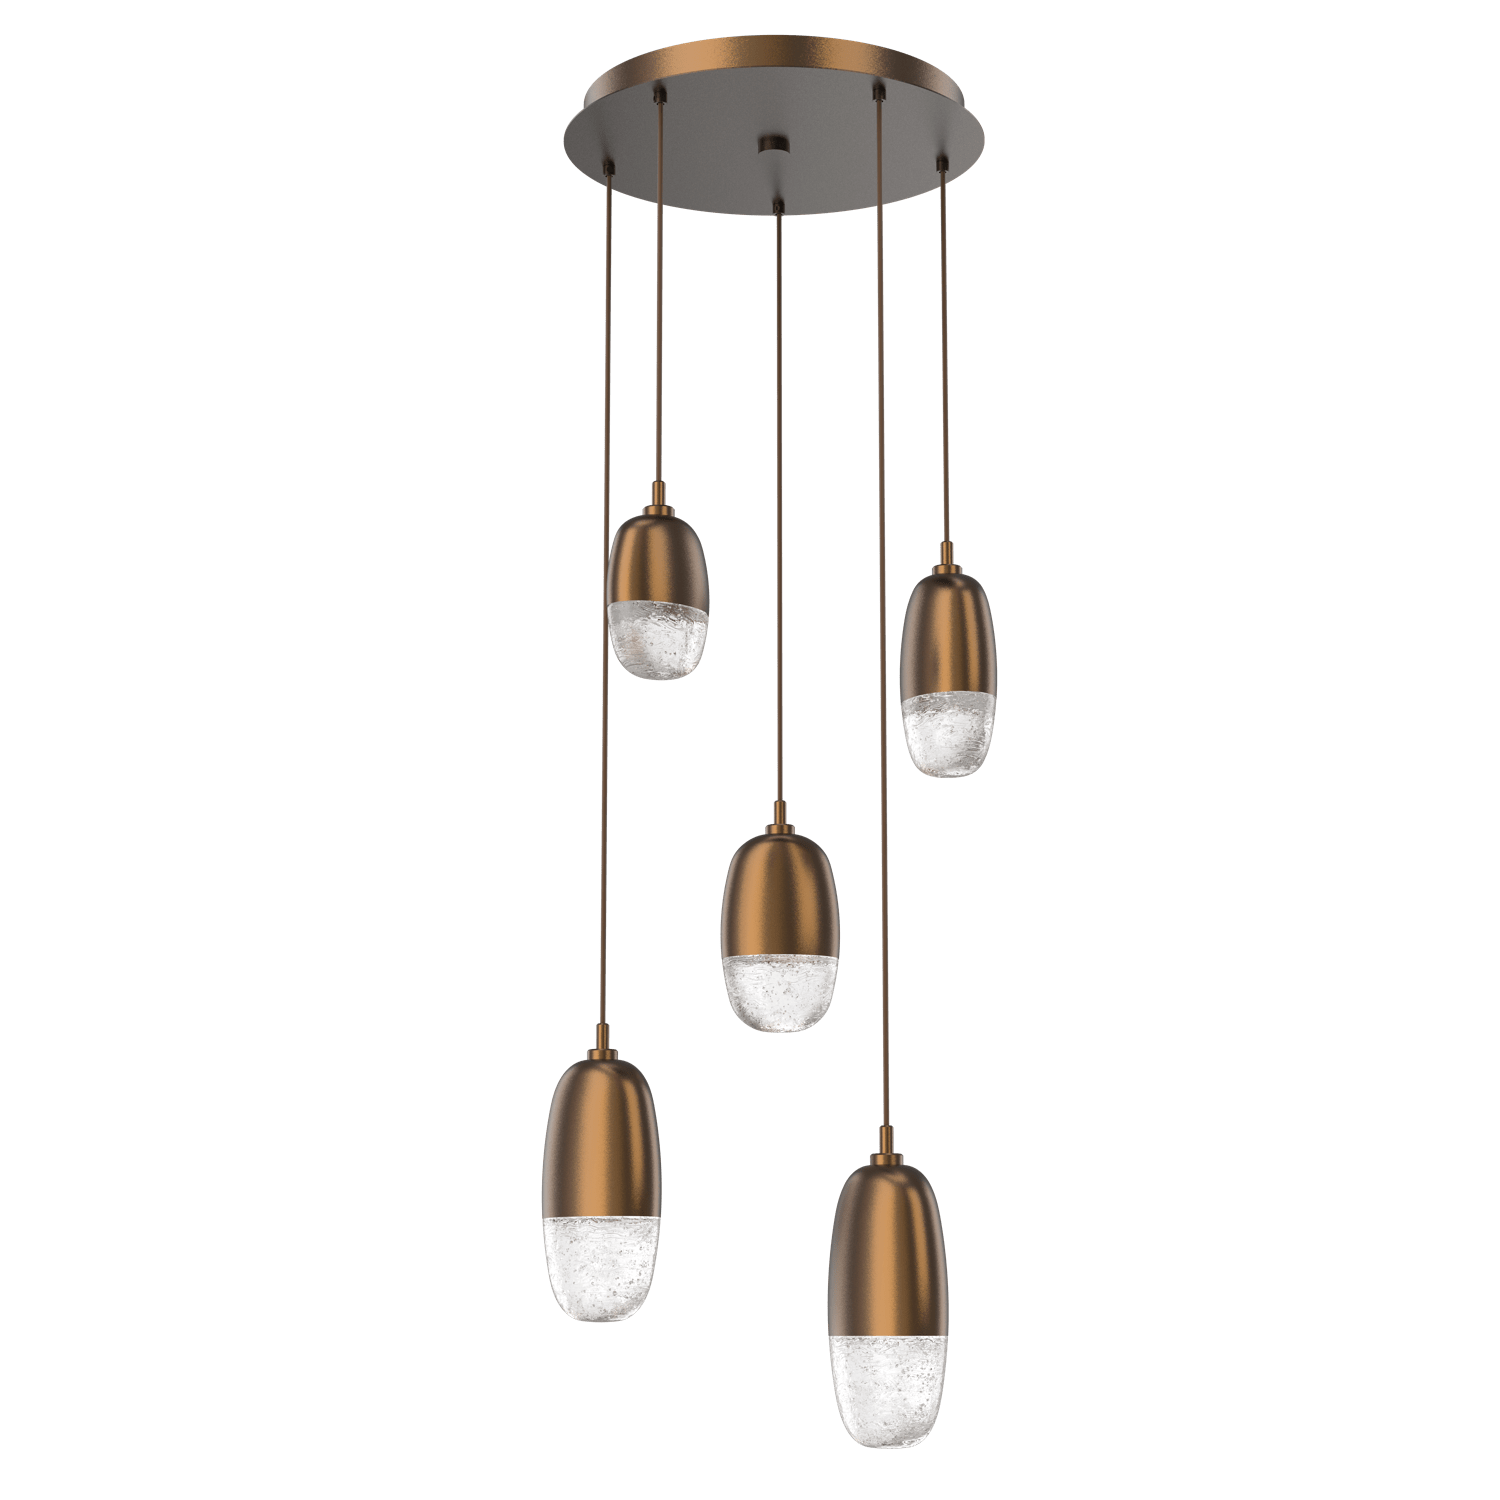 CHB0079-05-FB-Hammerton-Studio-Pebble-5-light-round-pendant-chandelier-with-flat-bronze-finish-and-clear-cast-glass-shades-and-LED-lamping